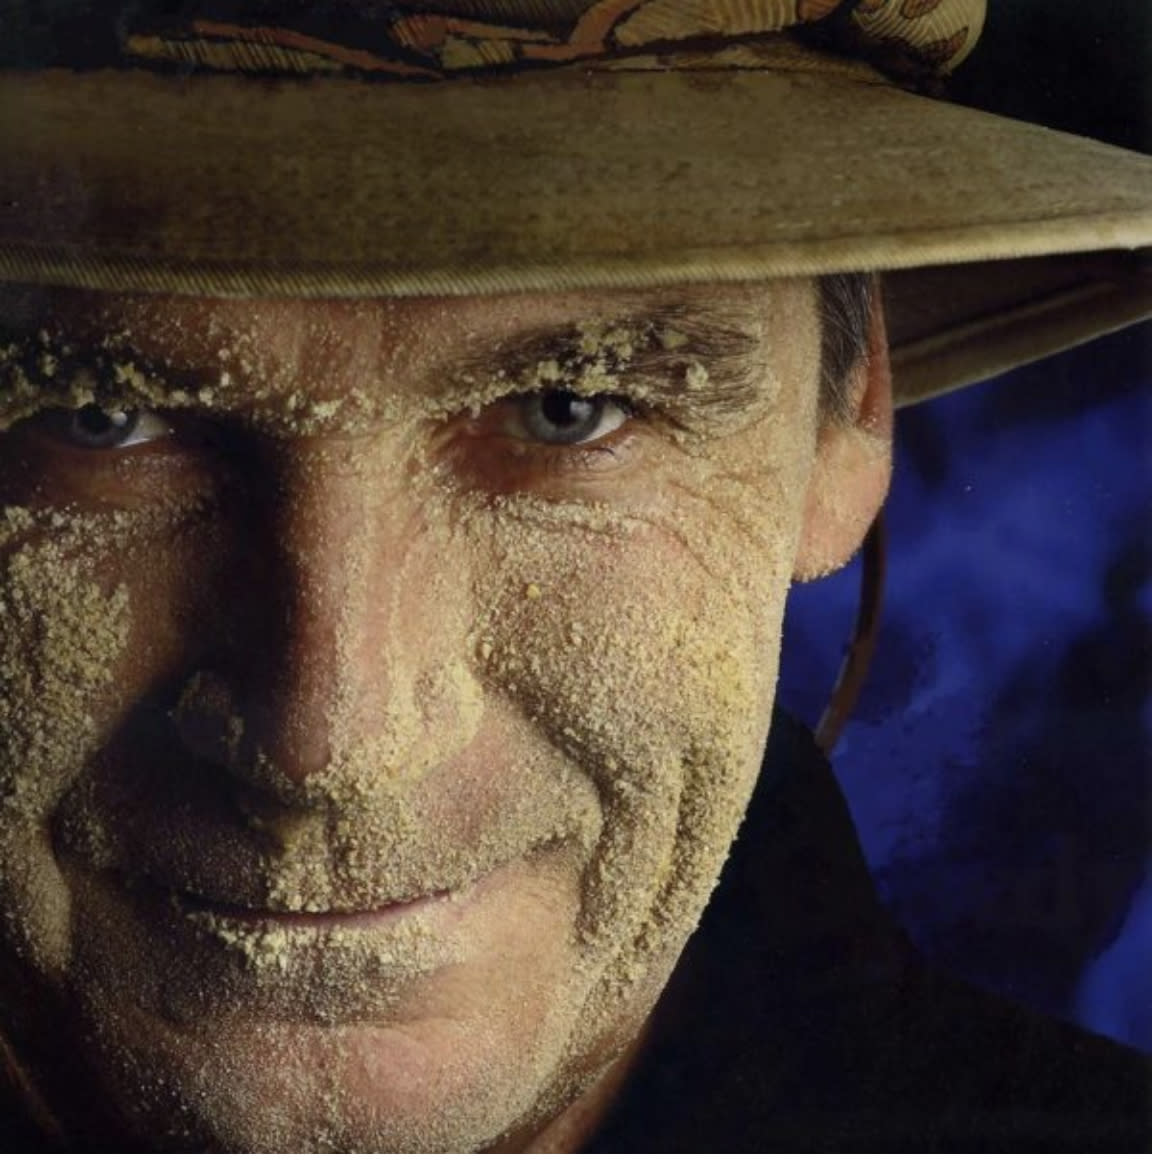 Close up headshot of a man smiling at the camera. He is wearing a hat and his face is covered in sand.